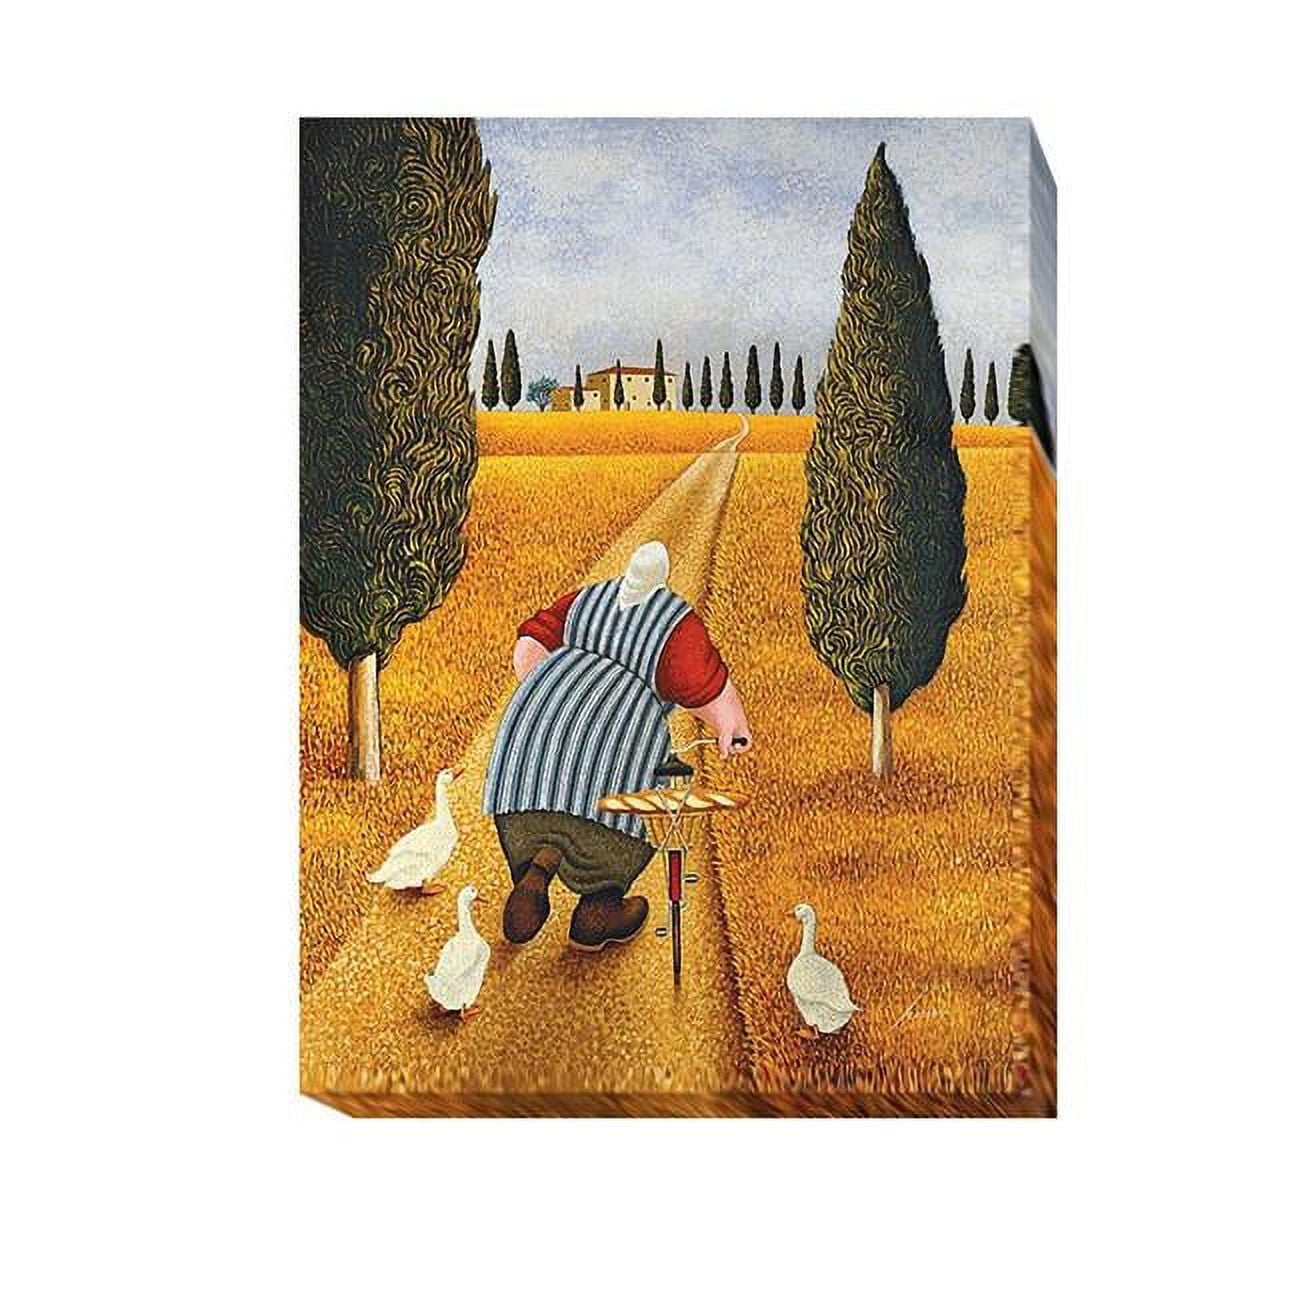 1216r394ig Lady With Fresh Bread By Lowell Herrero Premium Gallery-wrapped Canvas Giclee Art - 12 X 16 X 1.5 In.